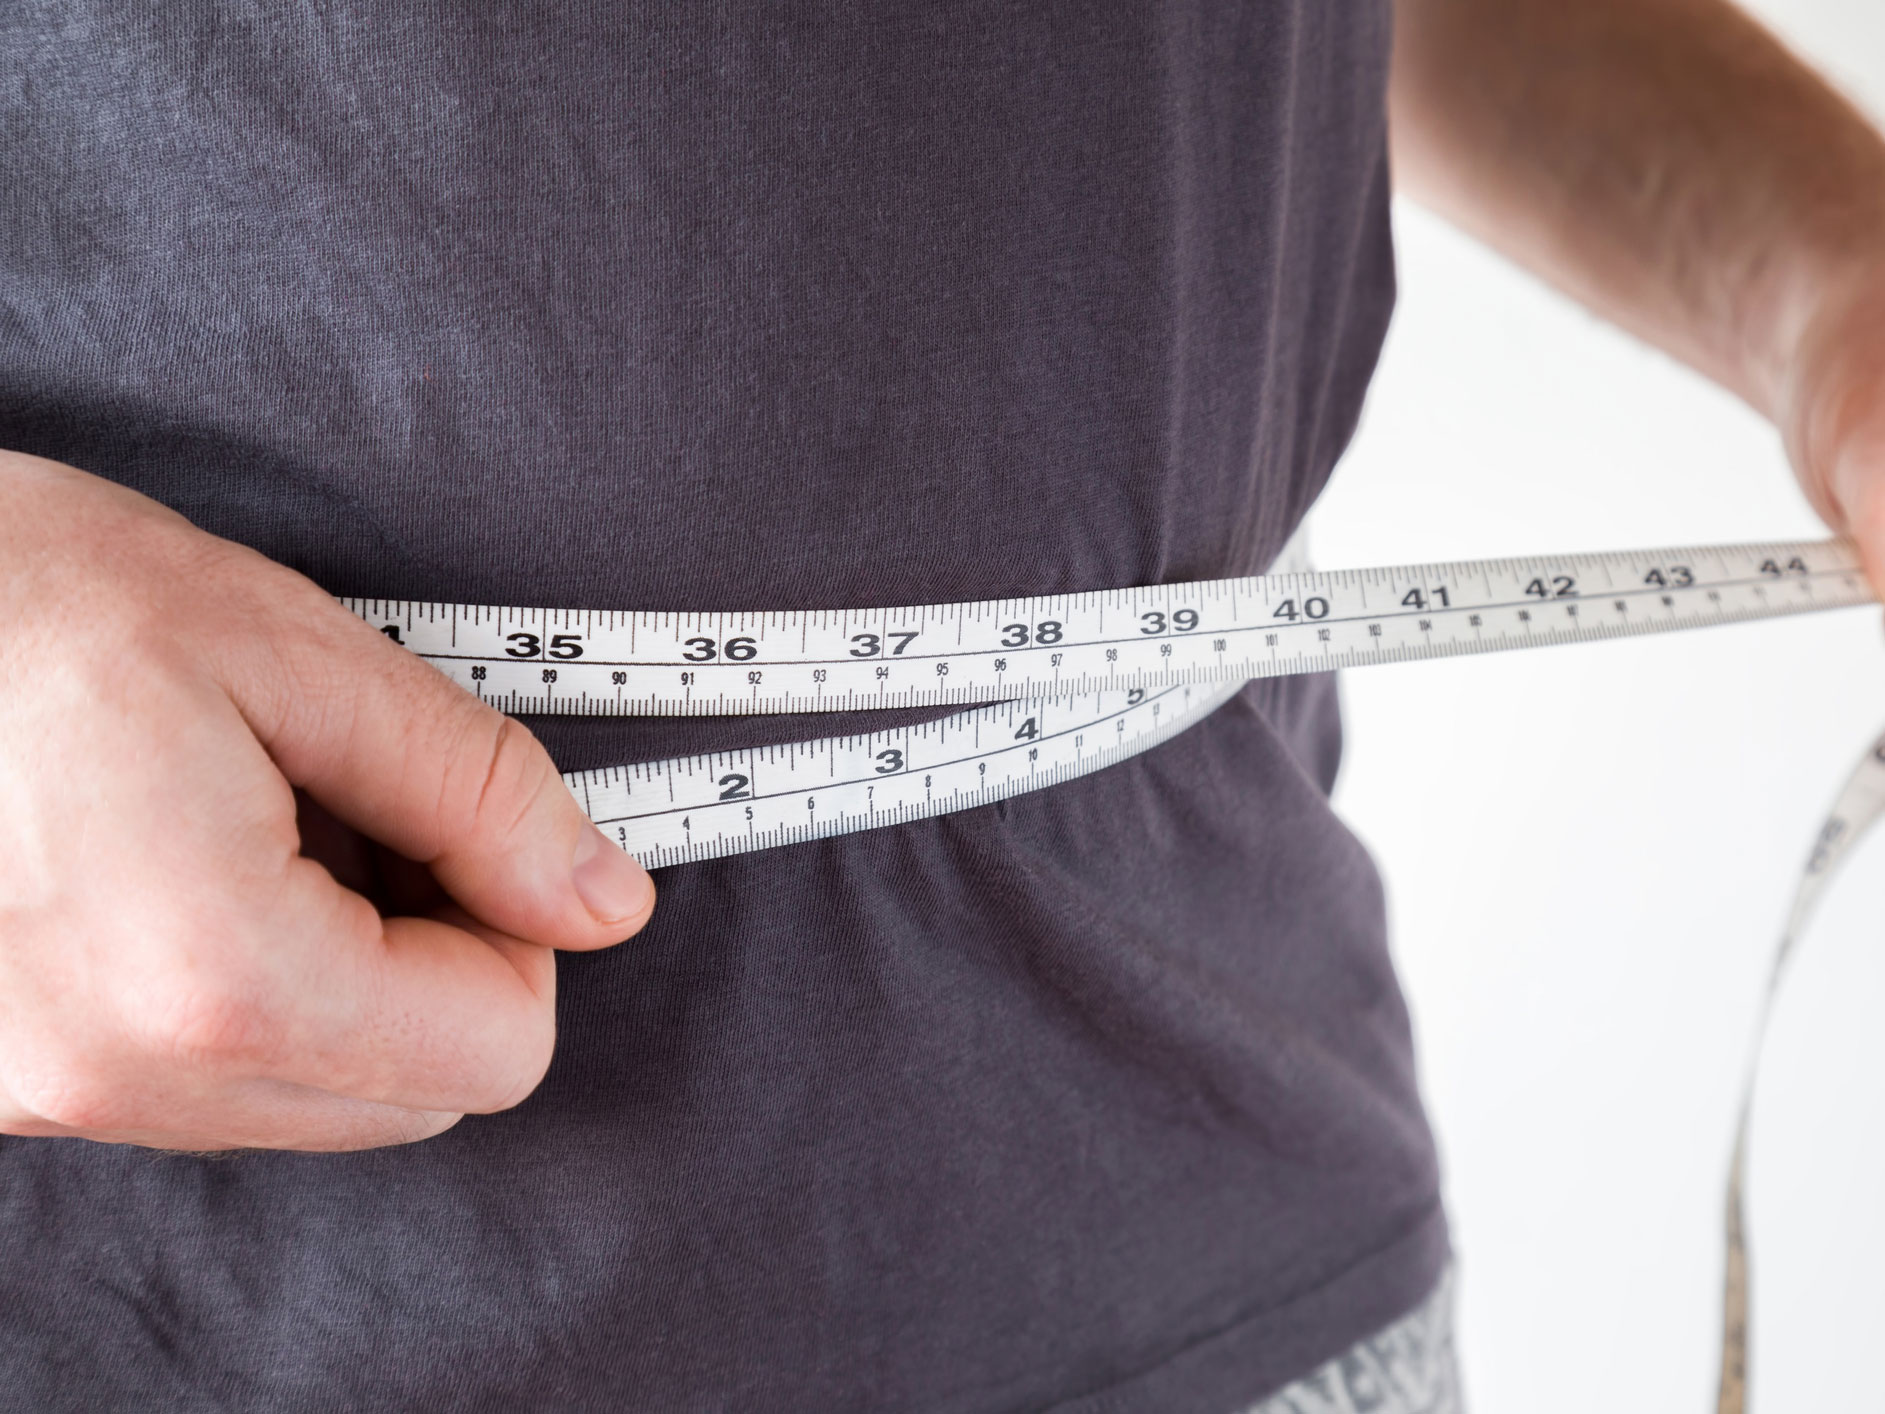 Focus on your waist, not weight, to beat diabetes and heart disease